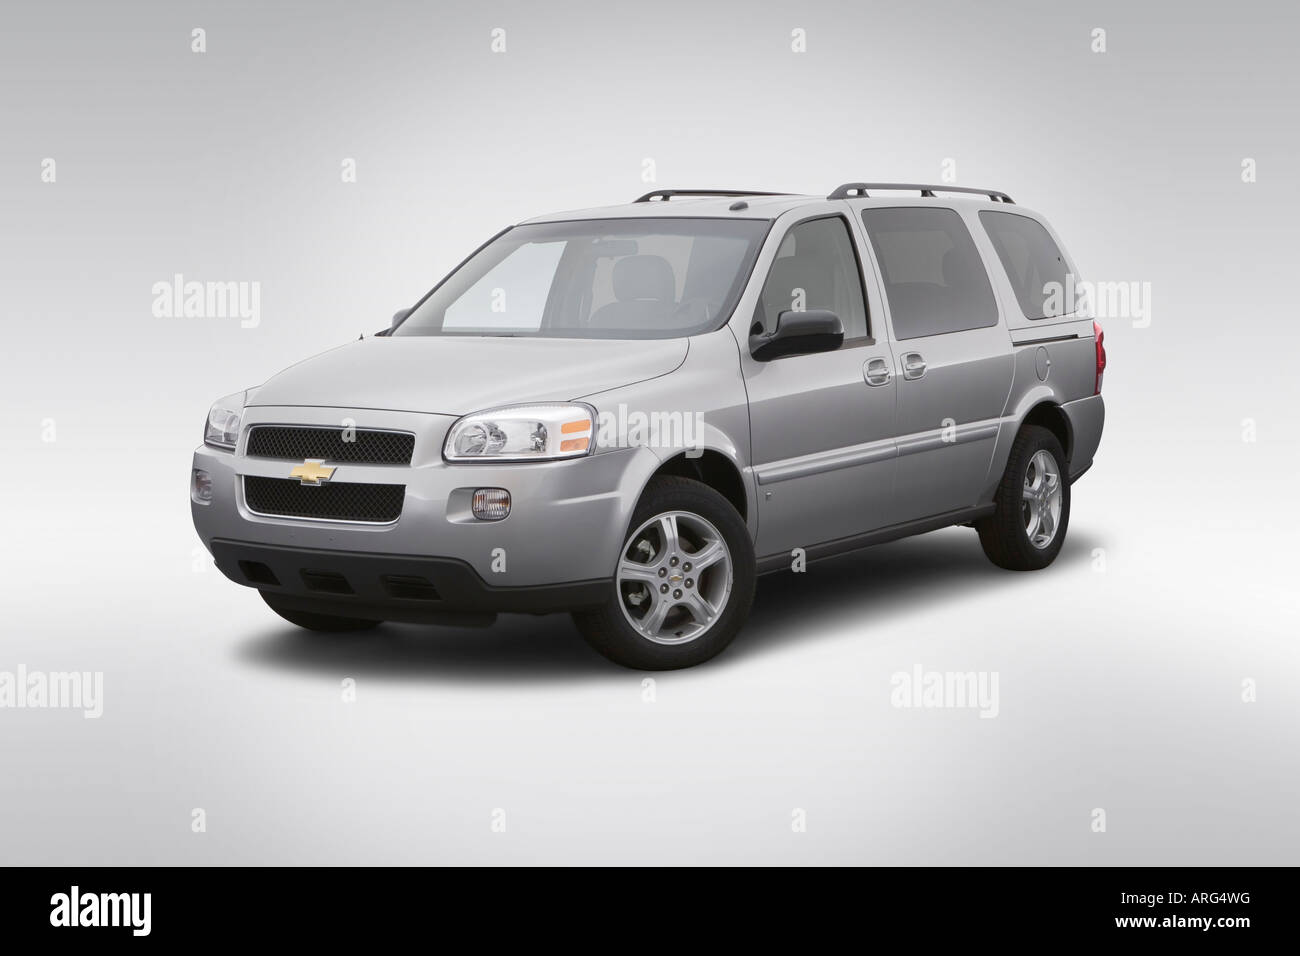 2007 Chevrolet Uplander LT in Silver - Front angle view Stock Photo